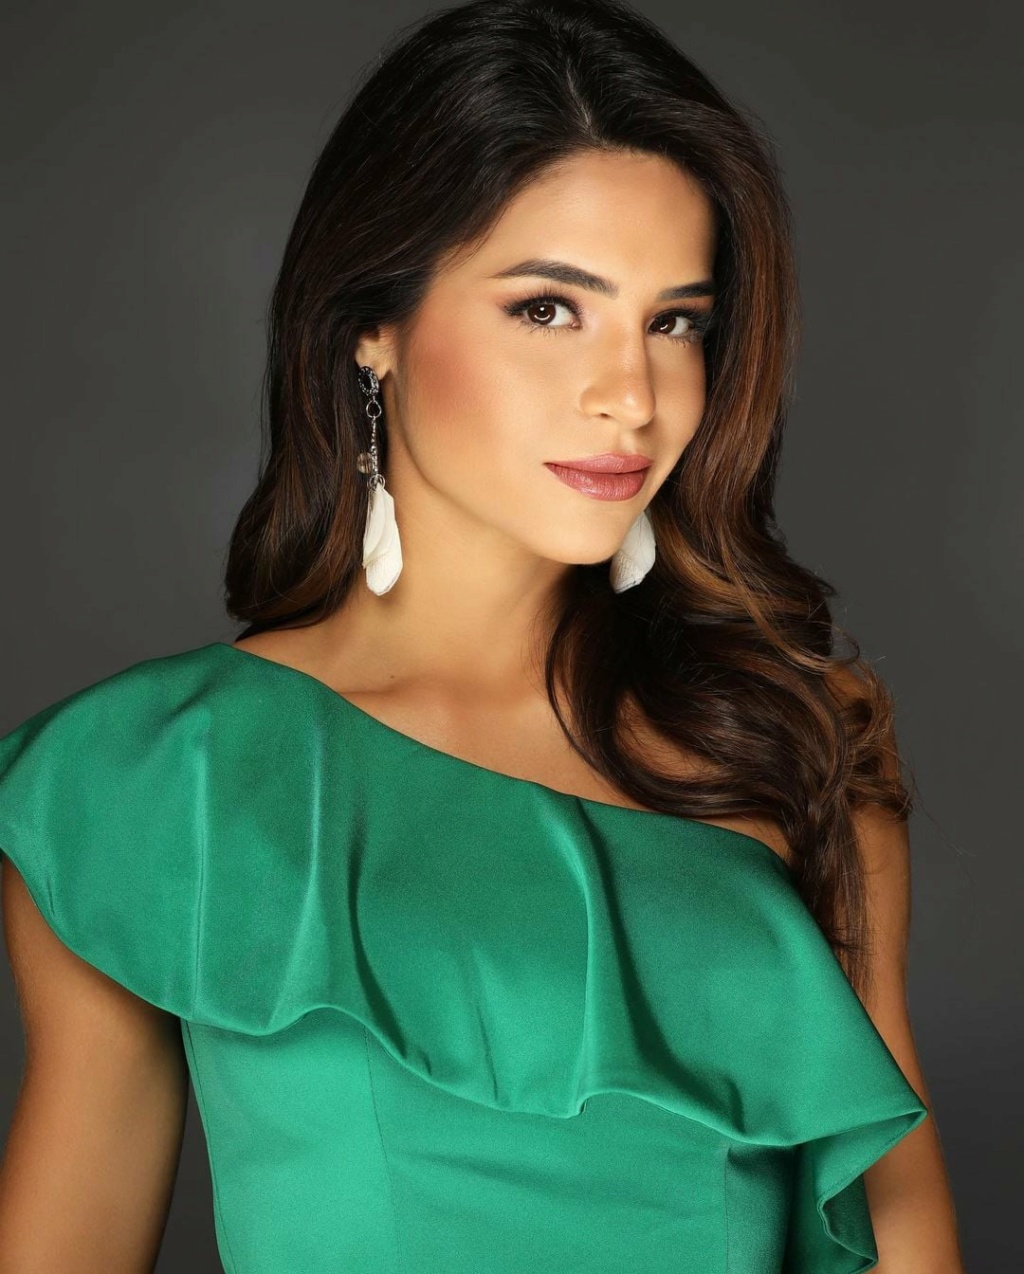 MISS WORLD 2021: OFFICIAL PORTRAITS 26690810